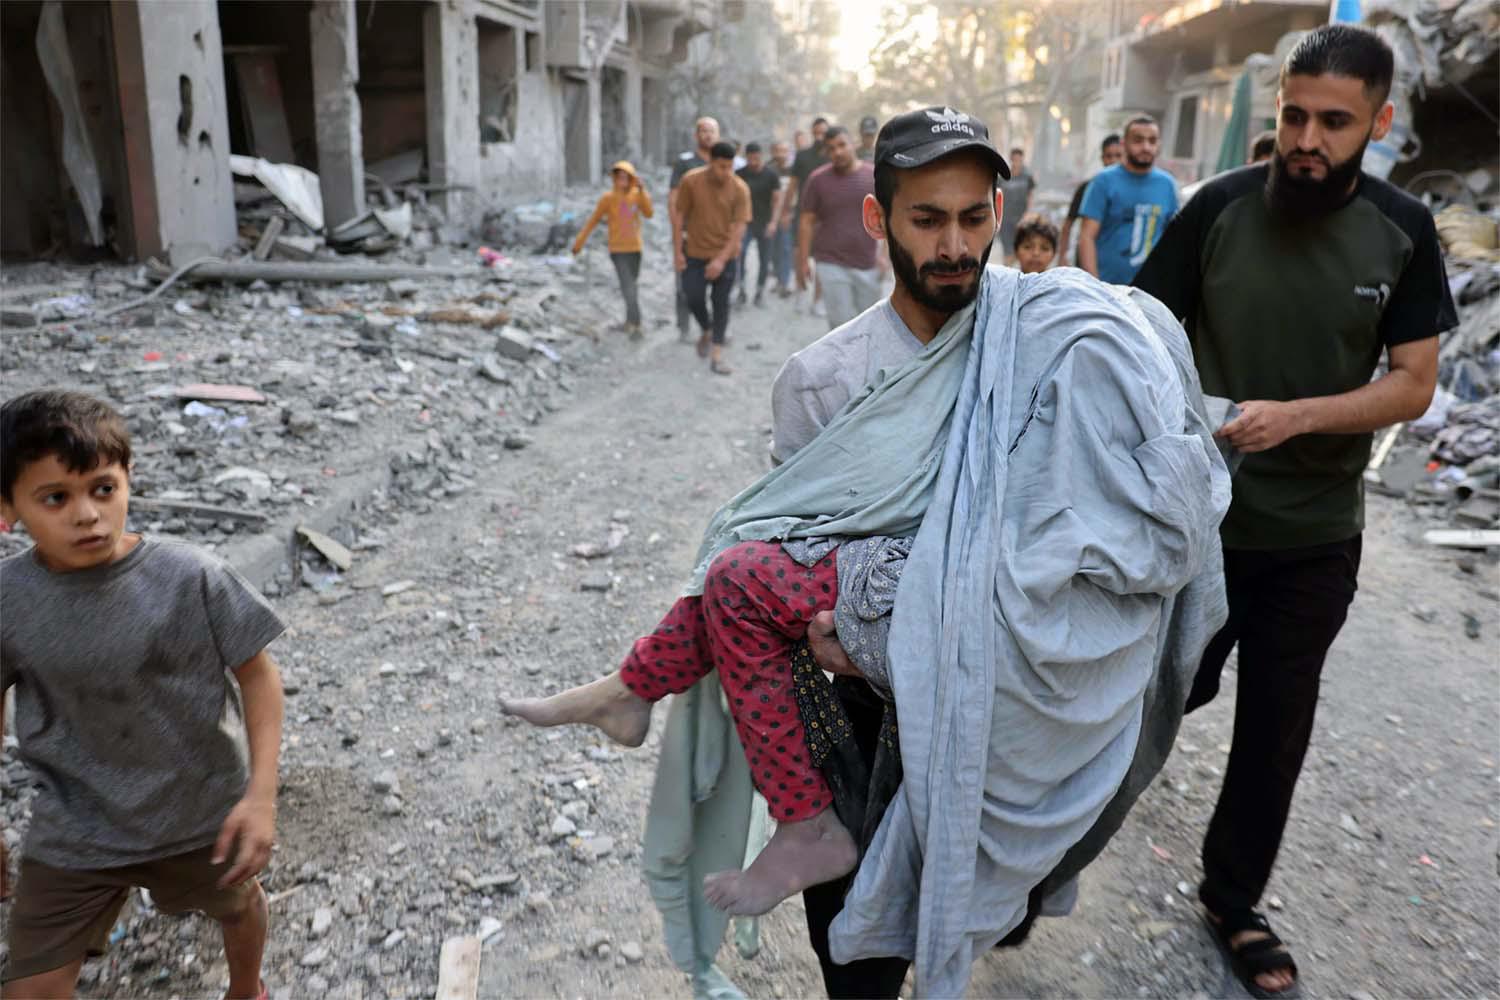 A Palestinian man carries the covered body of a girl removed from the rubble of a building in central Gaza